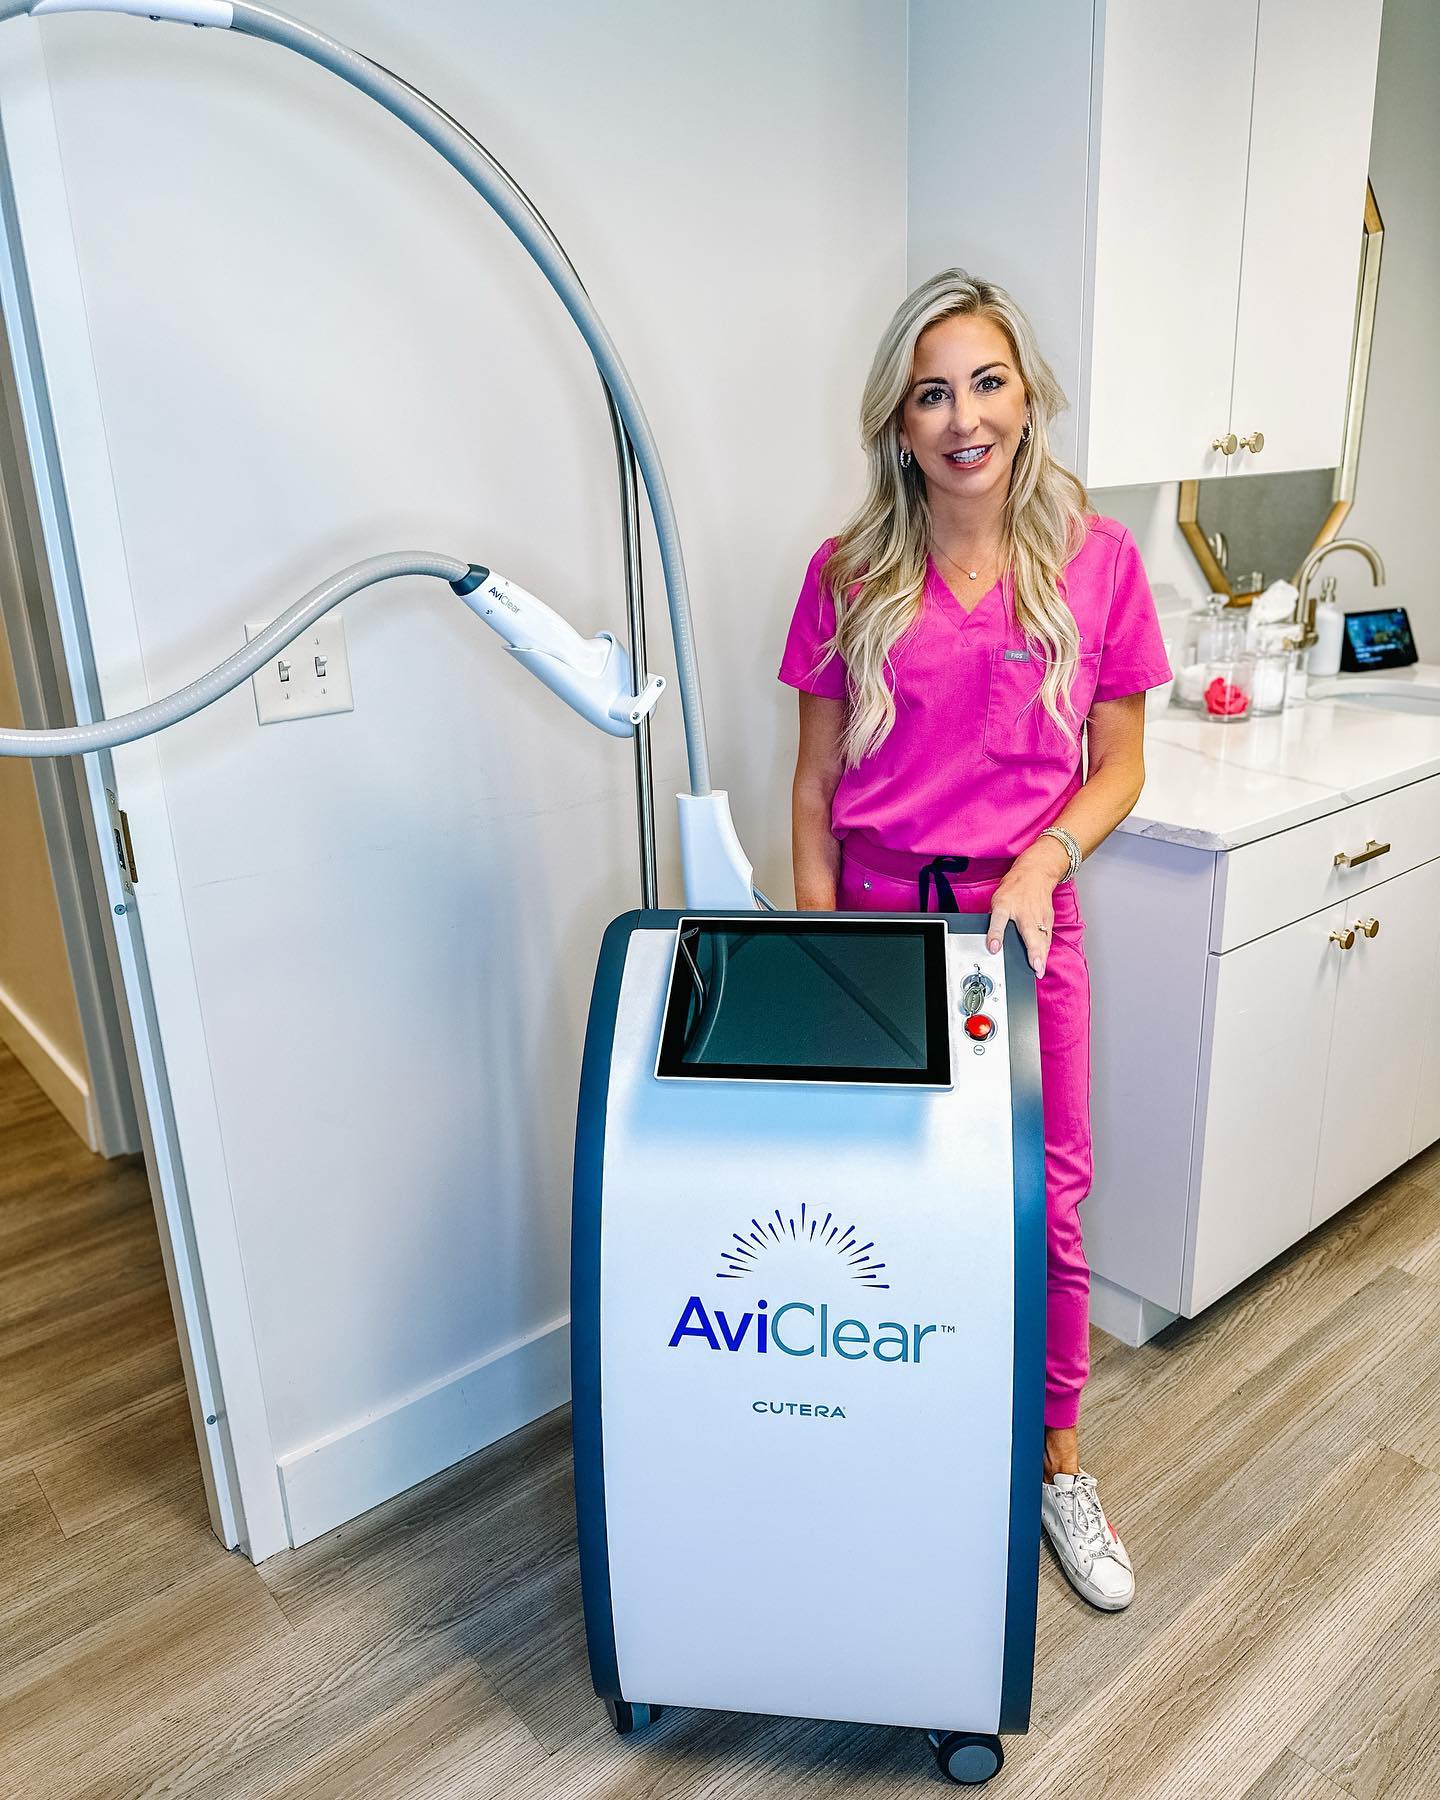 Rachel standing in treatment room with an AviClear machine